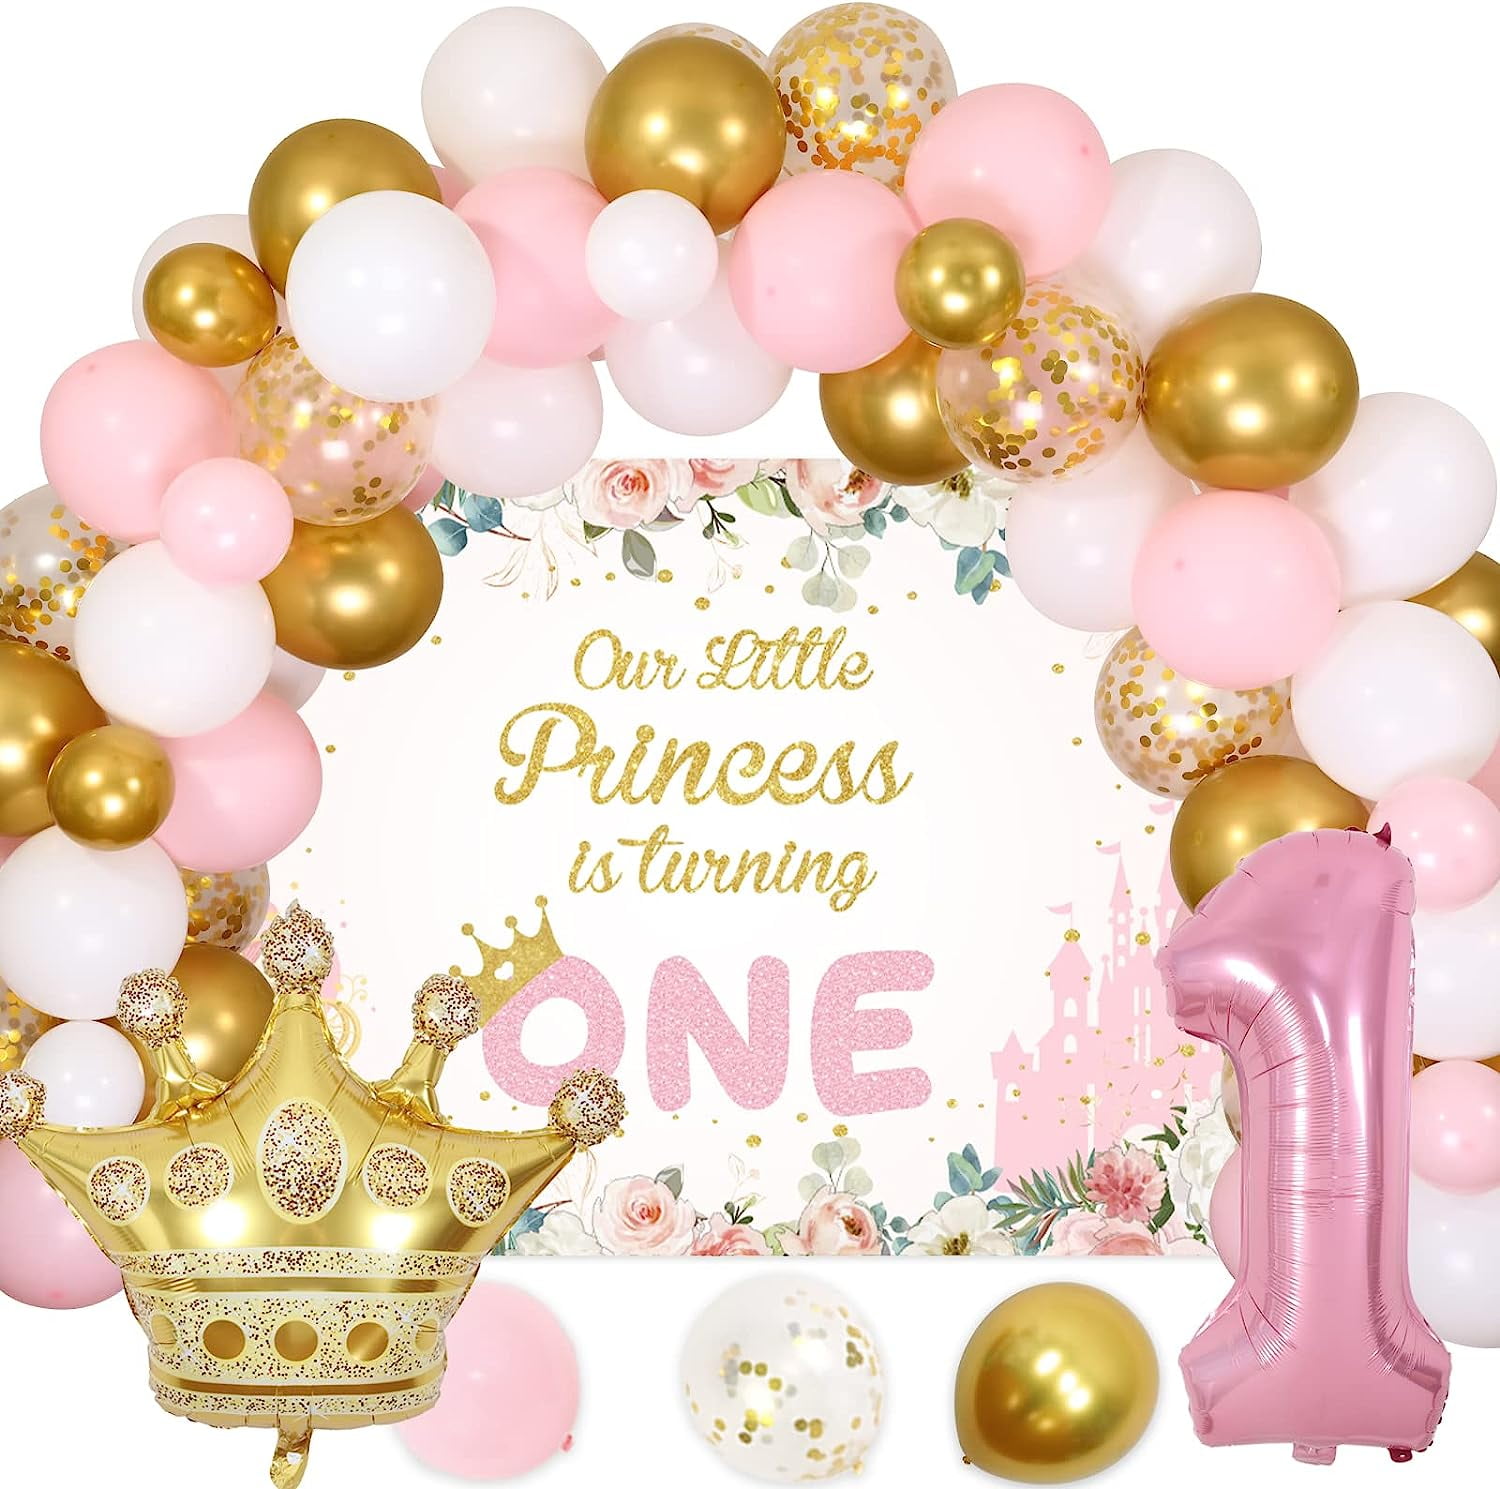 Aowee 1st Birthday Decoration, Pink White Balloon Arch with Happy Birthday Banner, Number 1 Foil Balloon, Pink Tablecloth for Birthday Girls Daughter